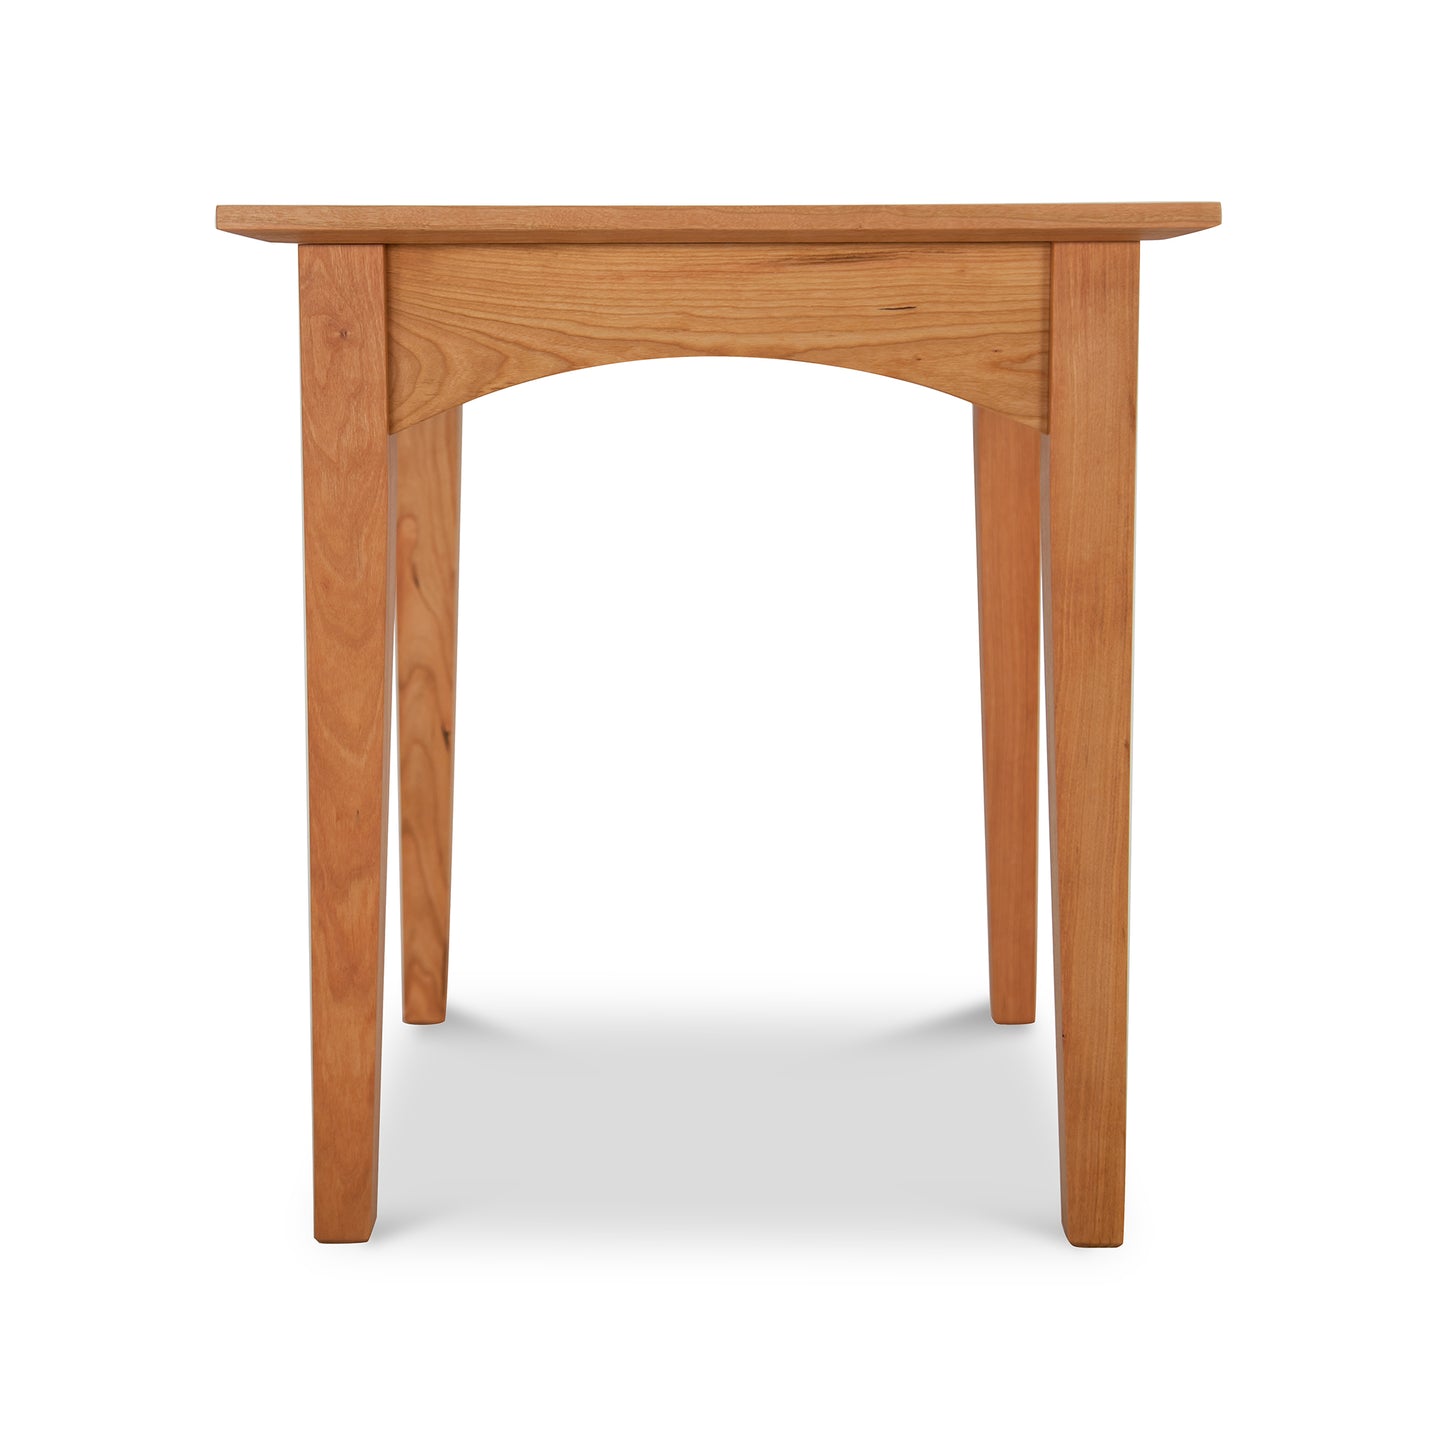 A simple American Shaker End Table from Maple Corner Woodworks with a round top and three legs, isolated on a white background.